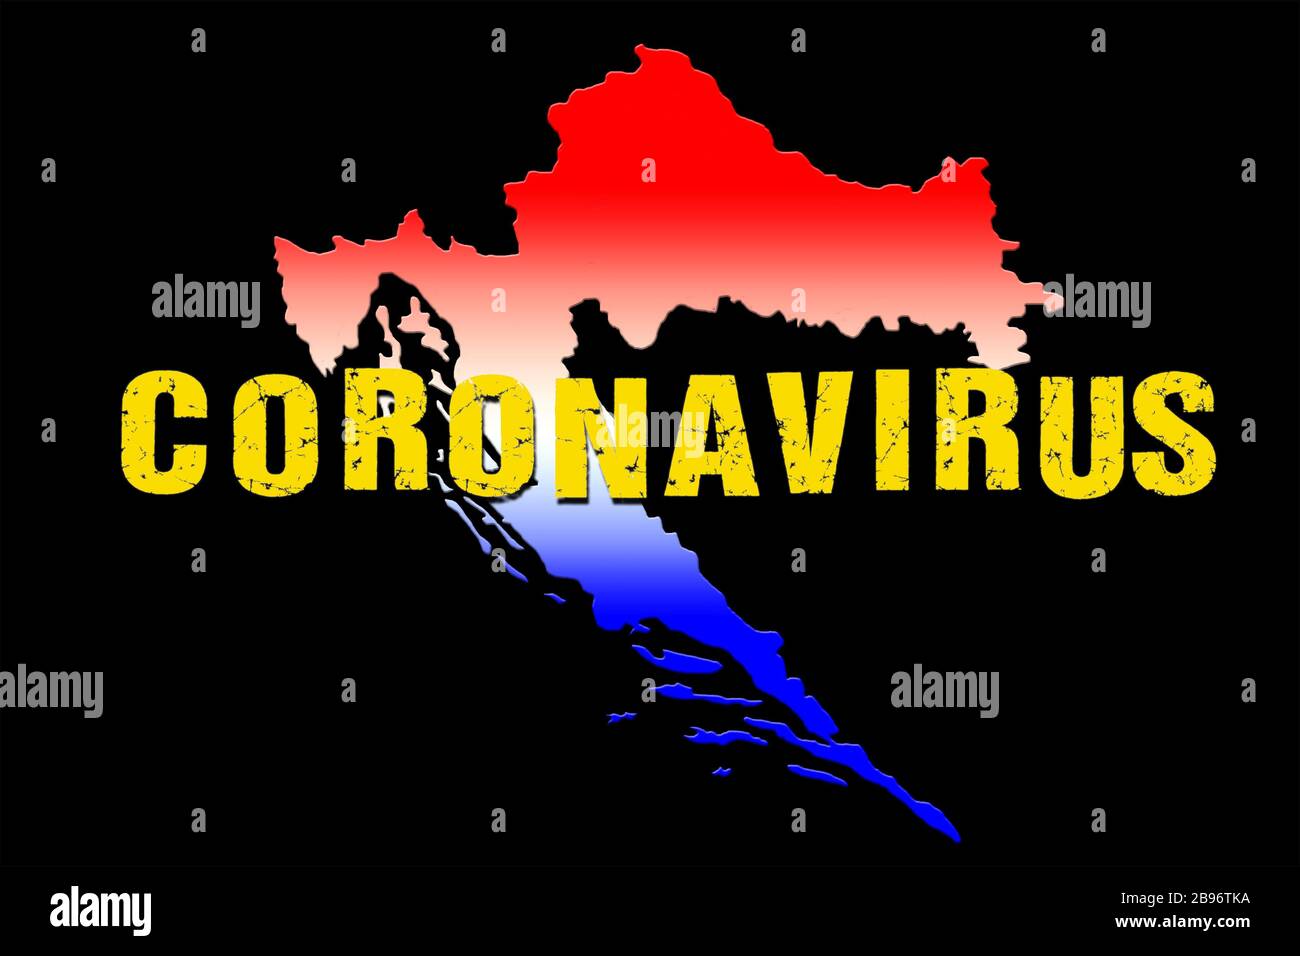 CORONA VIRUS title with Croatian flag and state border map on black background Stock Photo